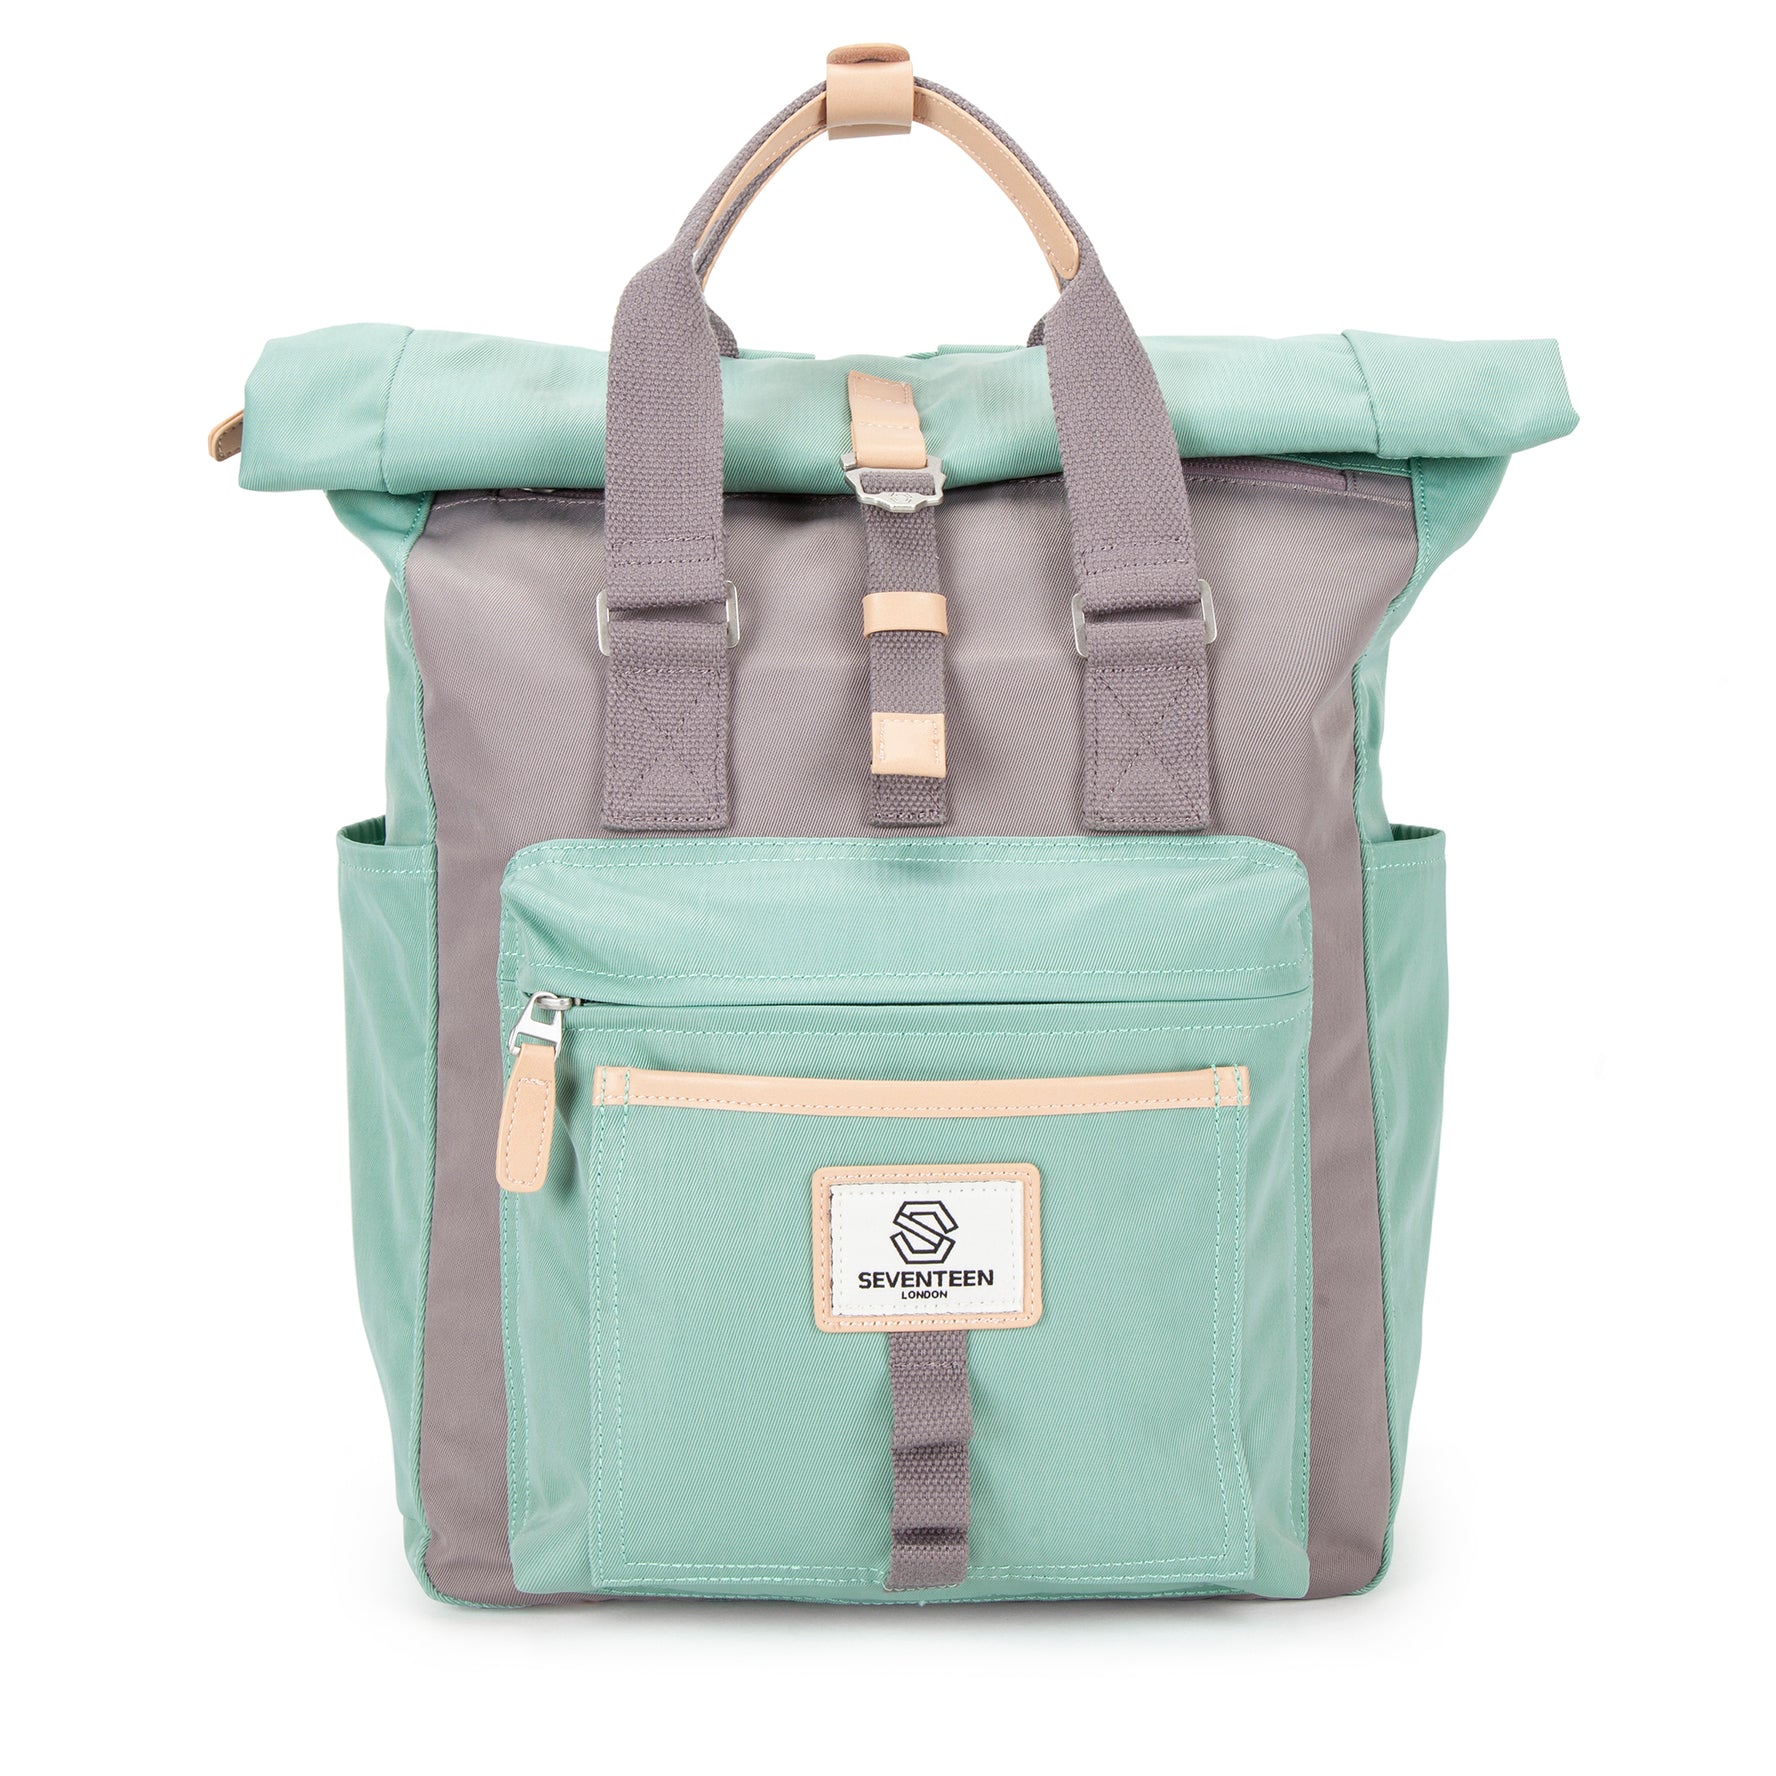 Canary Wharf Backpack-Backpack-17 London-Pastel Green/Grey-SchoolBagsAndStuff